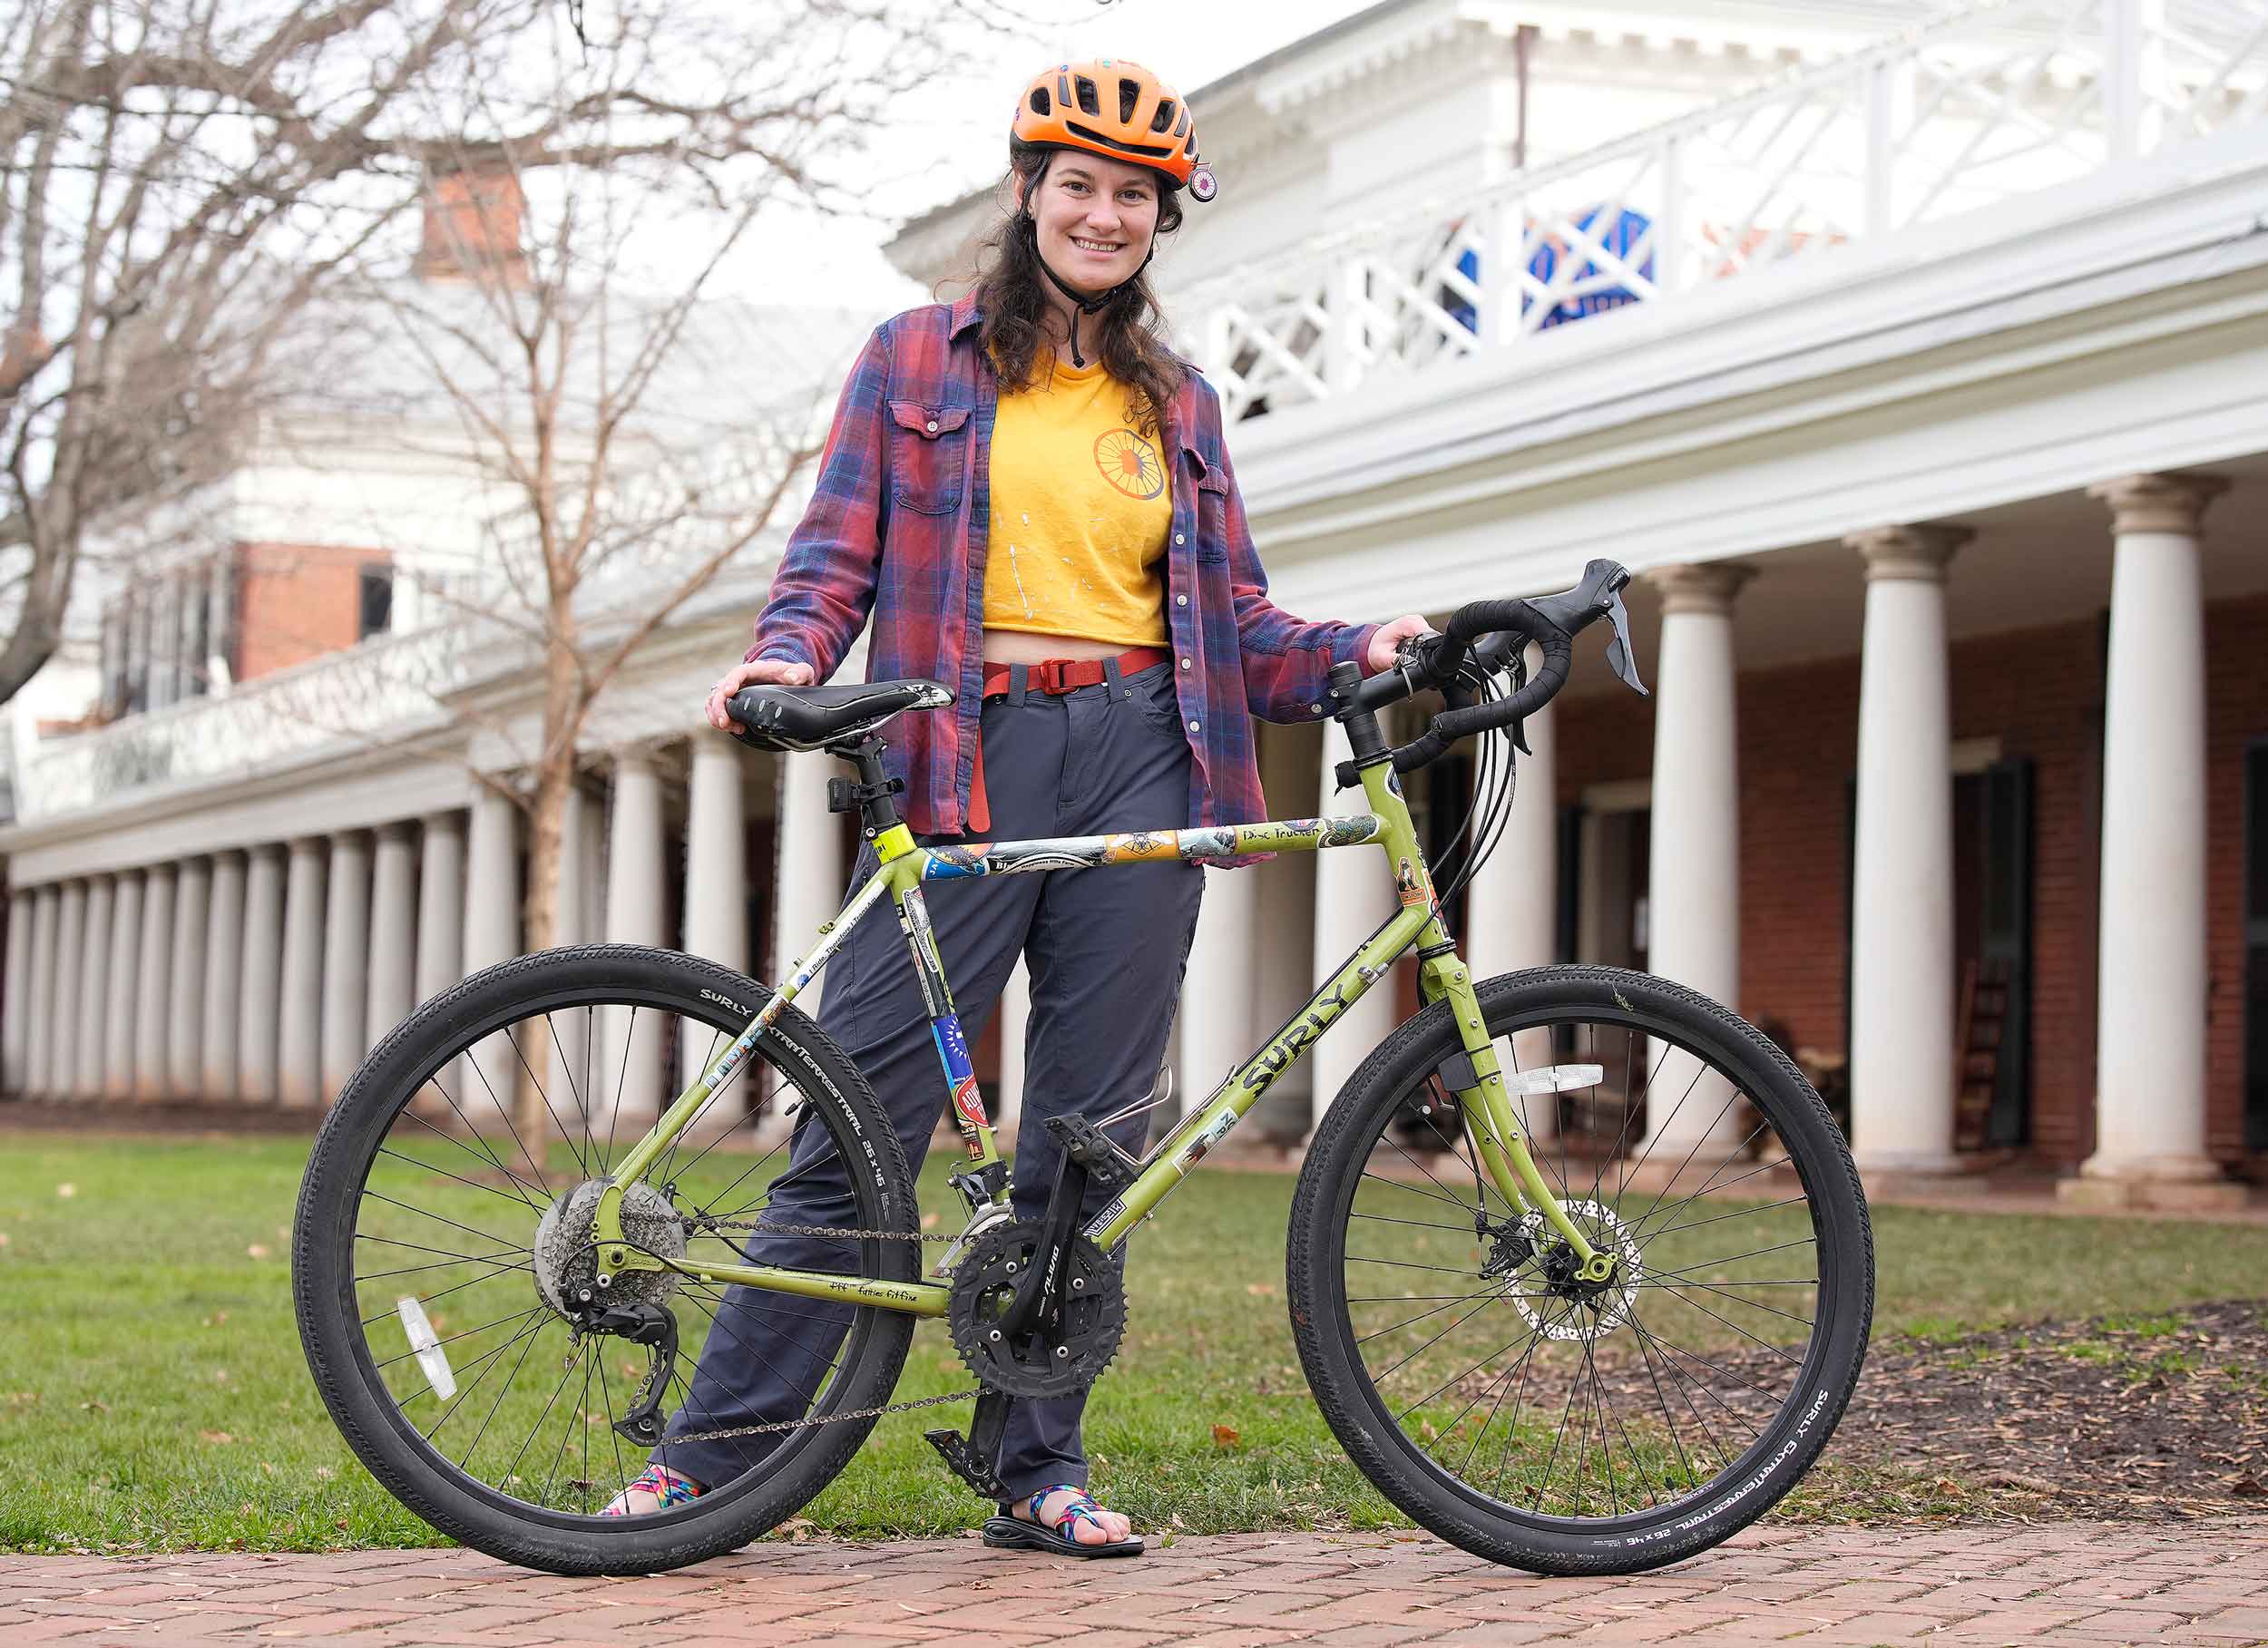 This Student's Cross Country Bike Trip Builds Goodness, One Pedal Stroke at  a Time